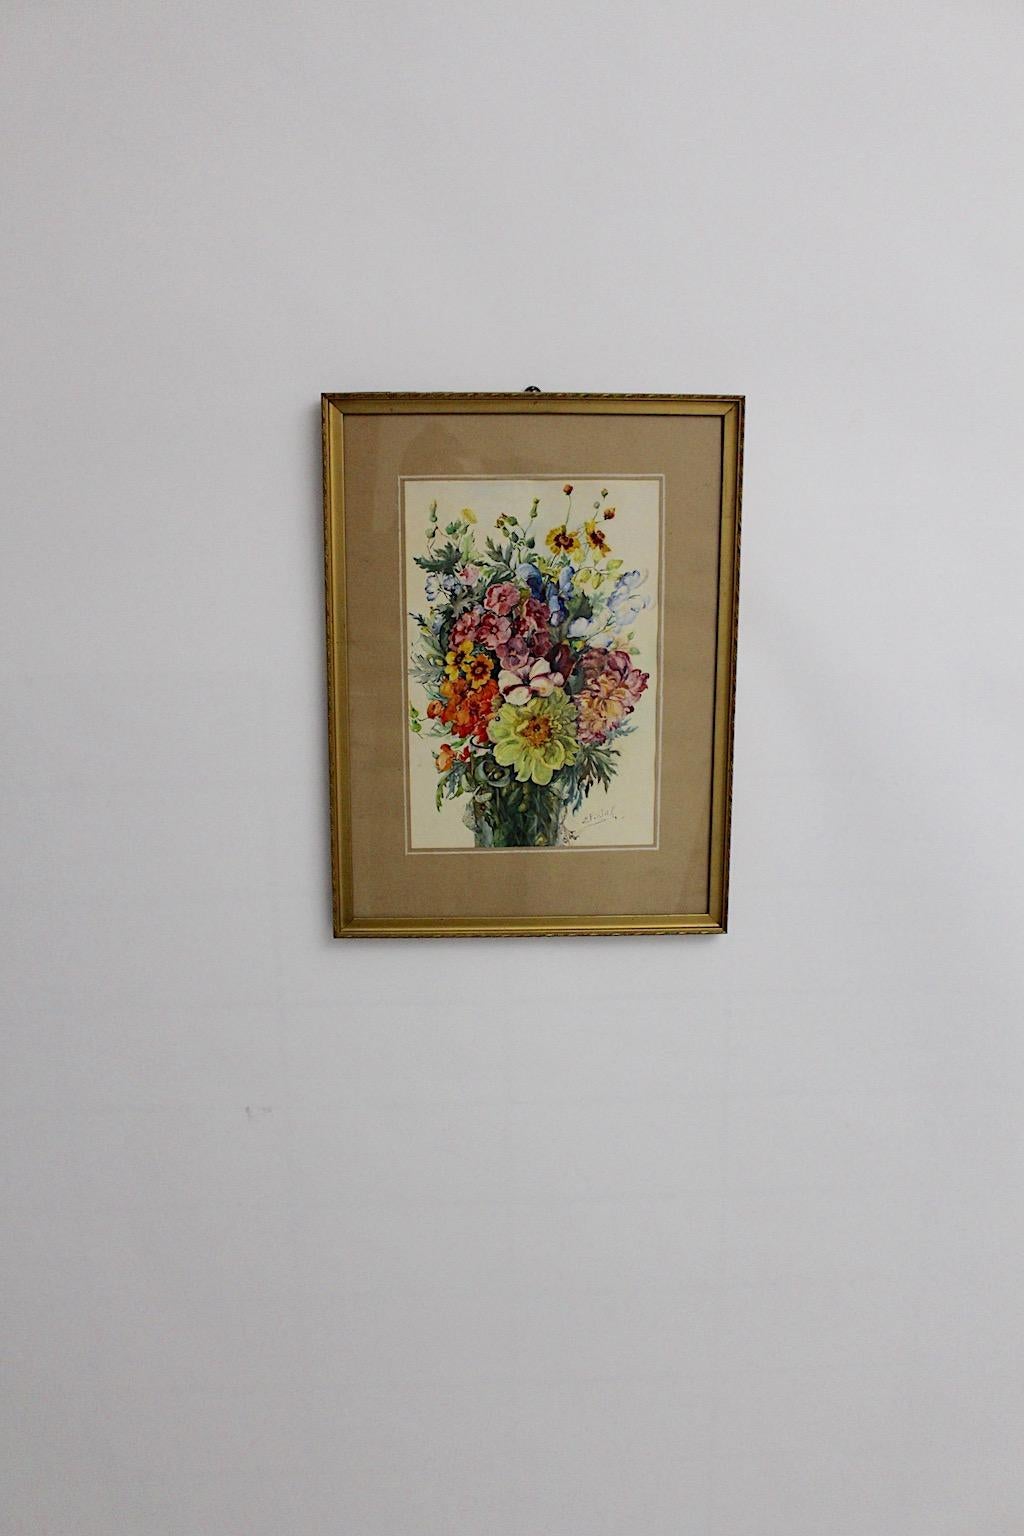 Austrian Art Deco Watercolor Vintage Painting Wildflowers by Emil Fiala, Vienna, 1930s For Sale